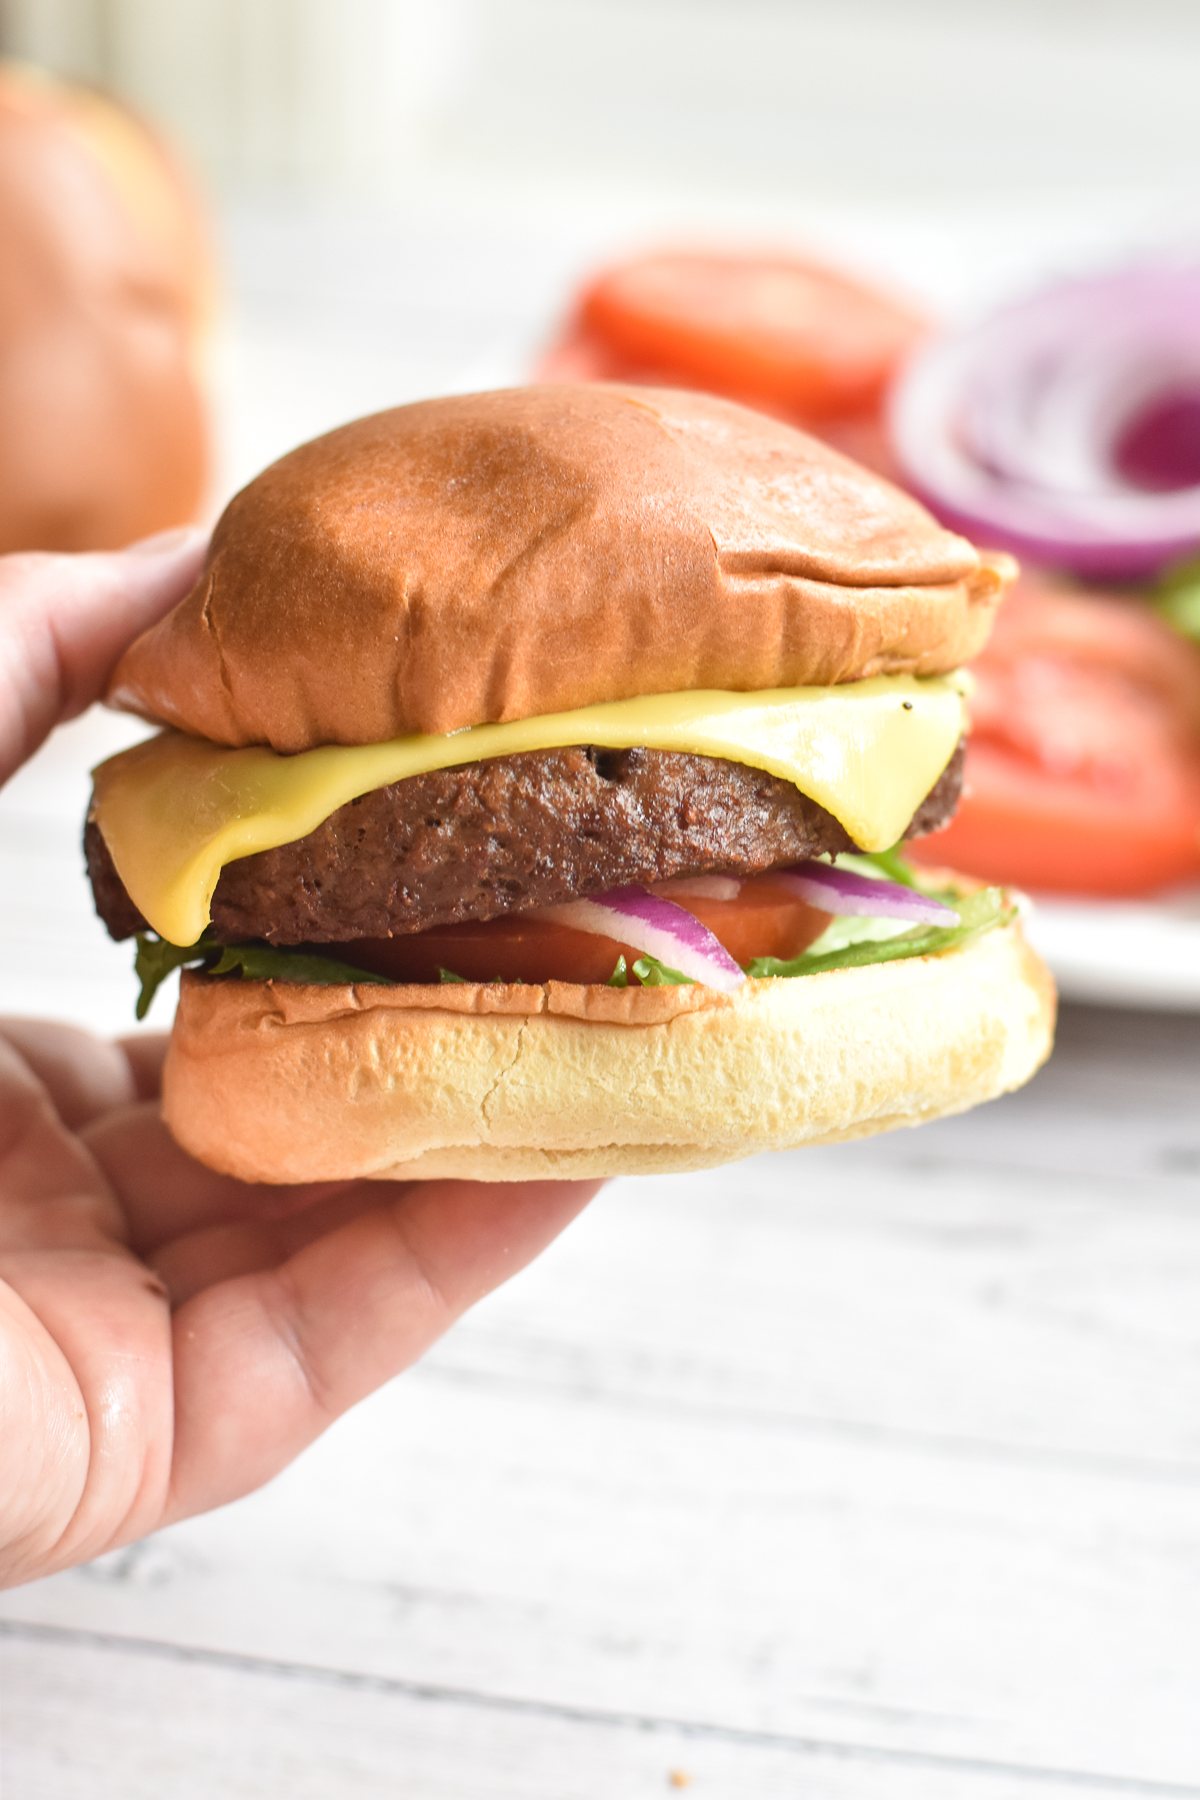 Air Fryer Impossible Burgers are perfect for burger night! It's so easy to make vegan burgers in the air fryer.